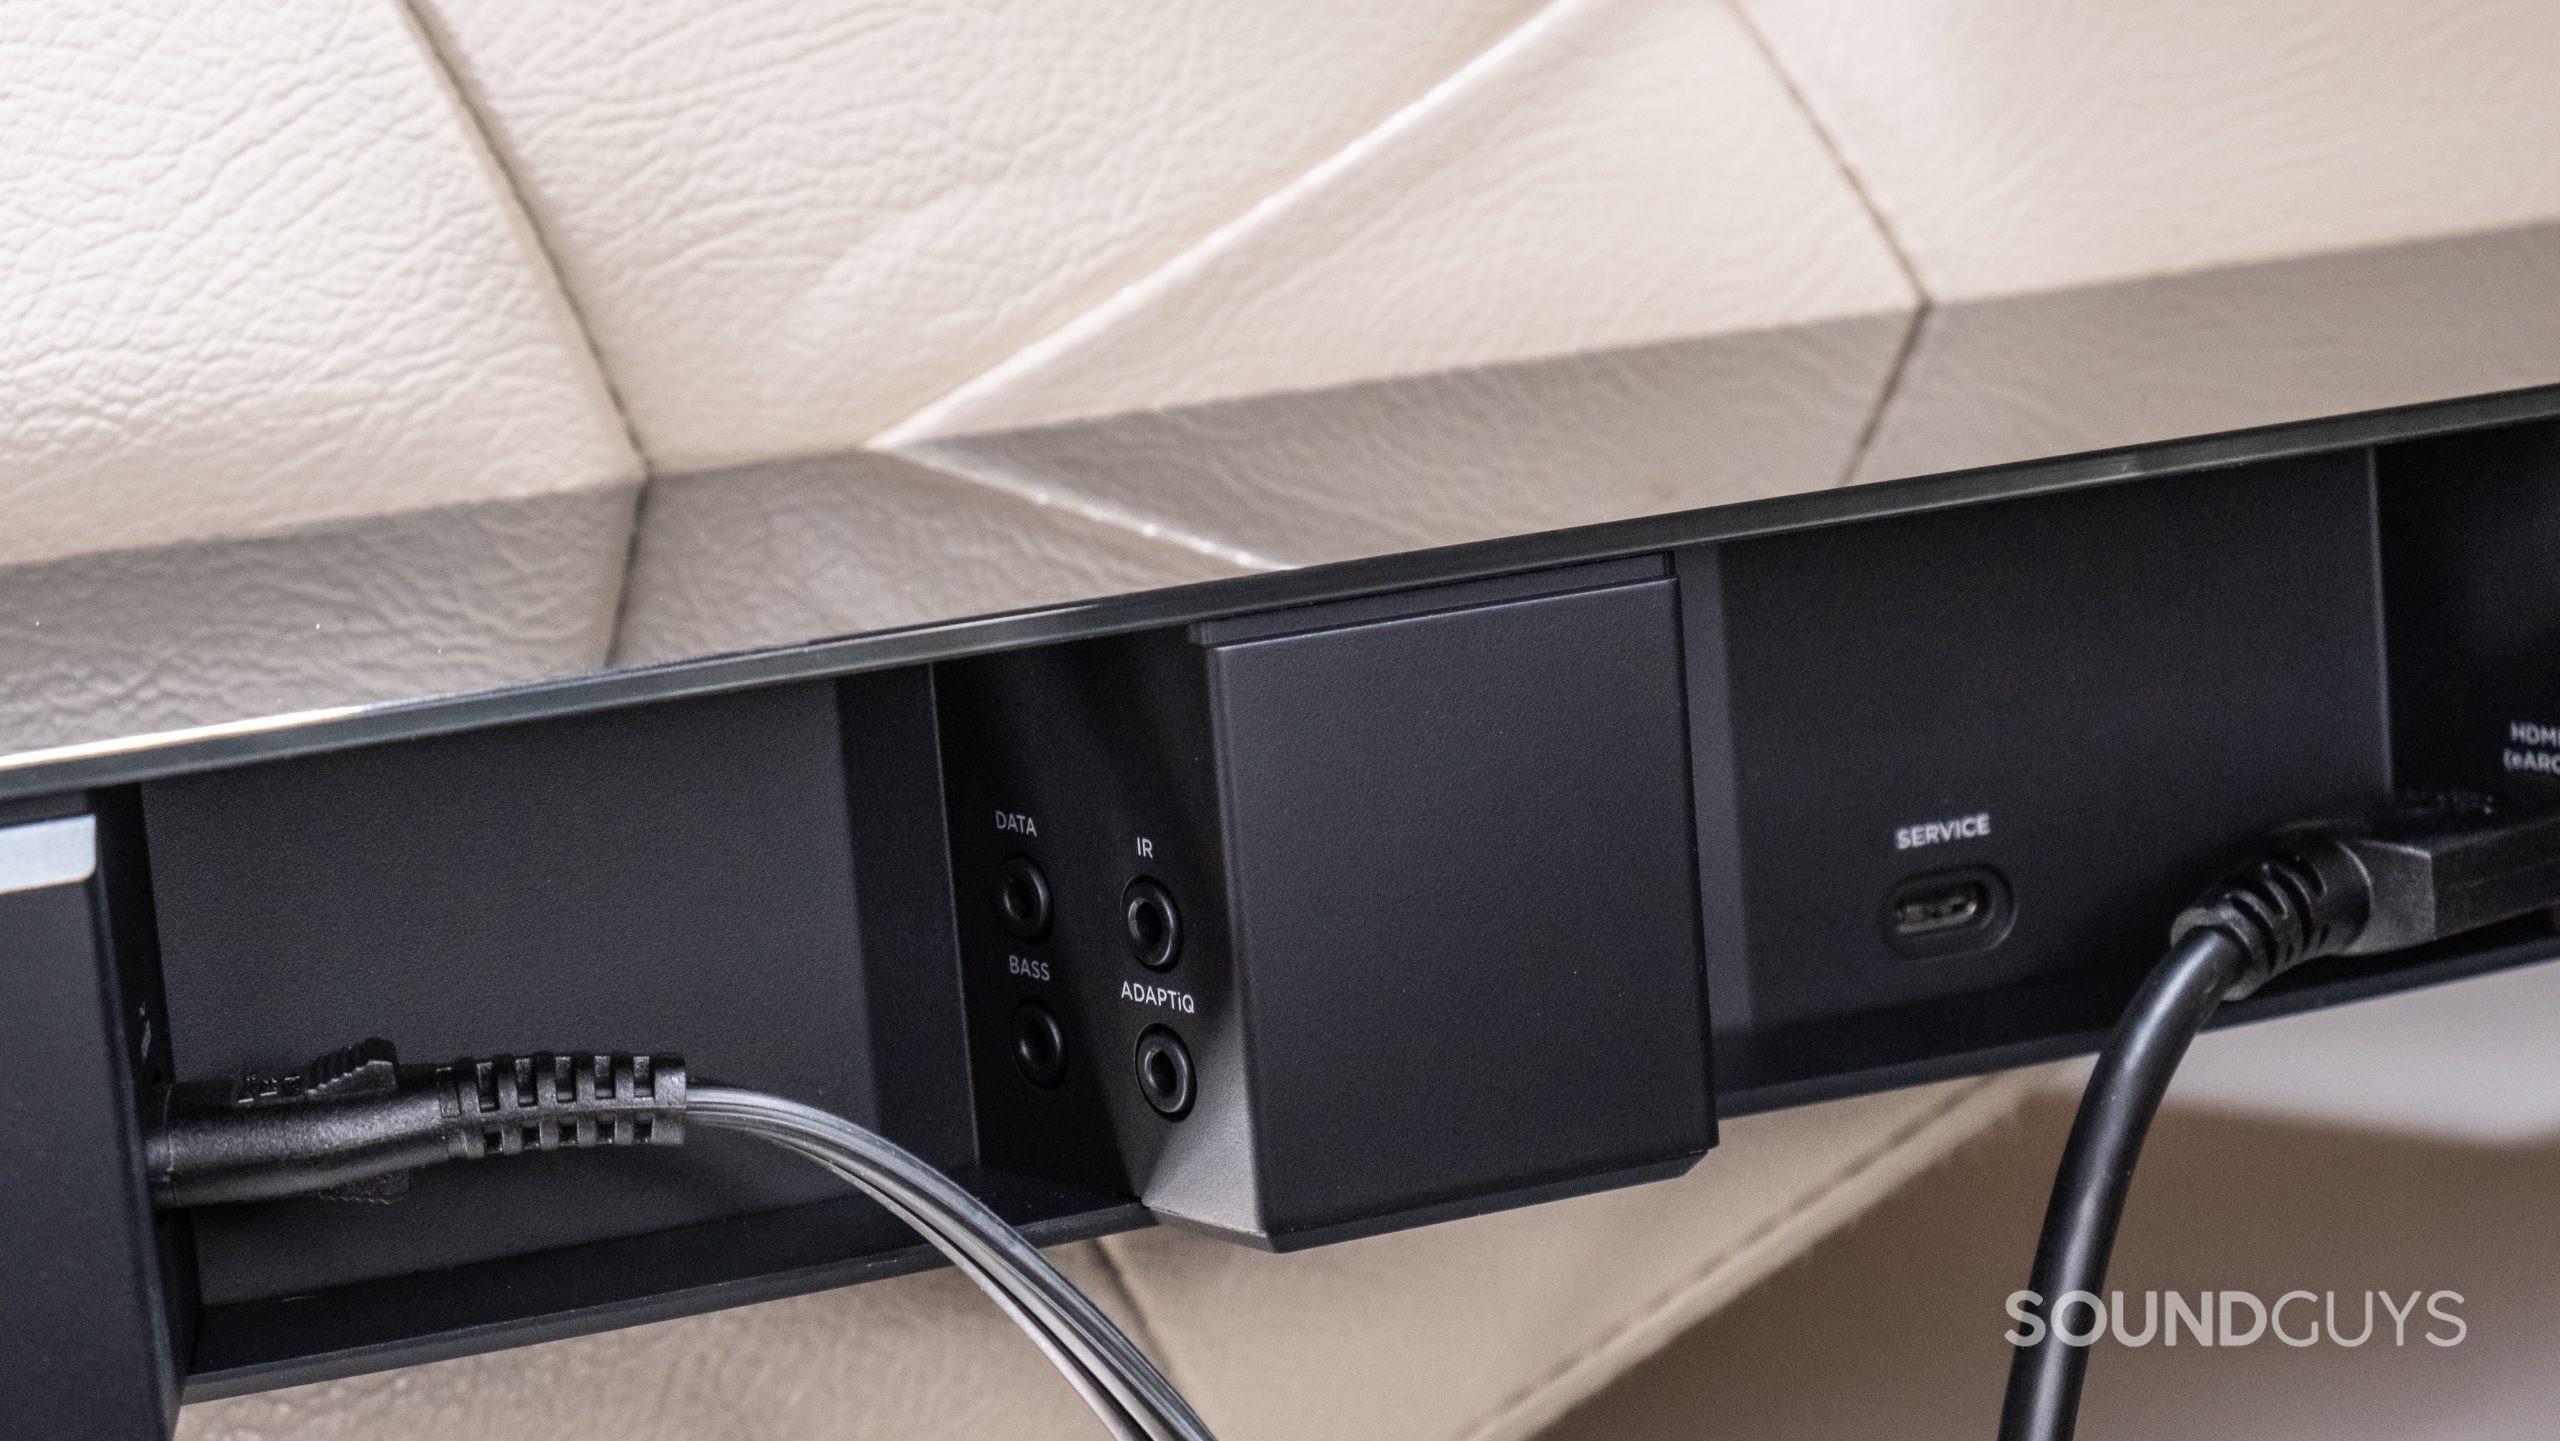 Image shows the back port connections for the Bose Smart Soundbar 900.